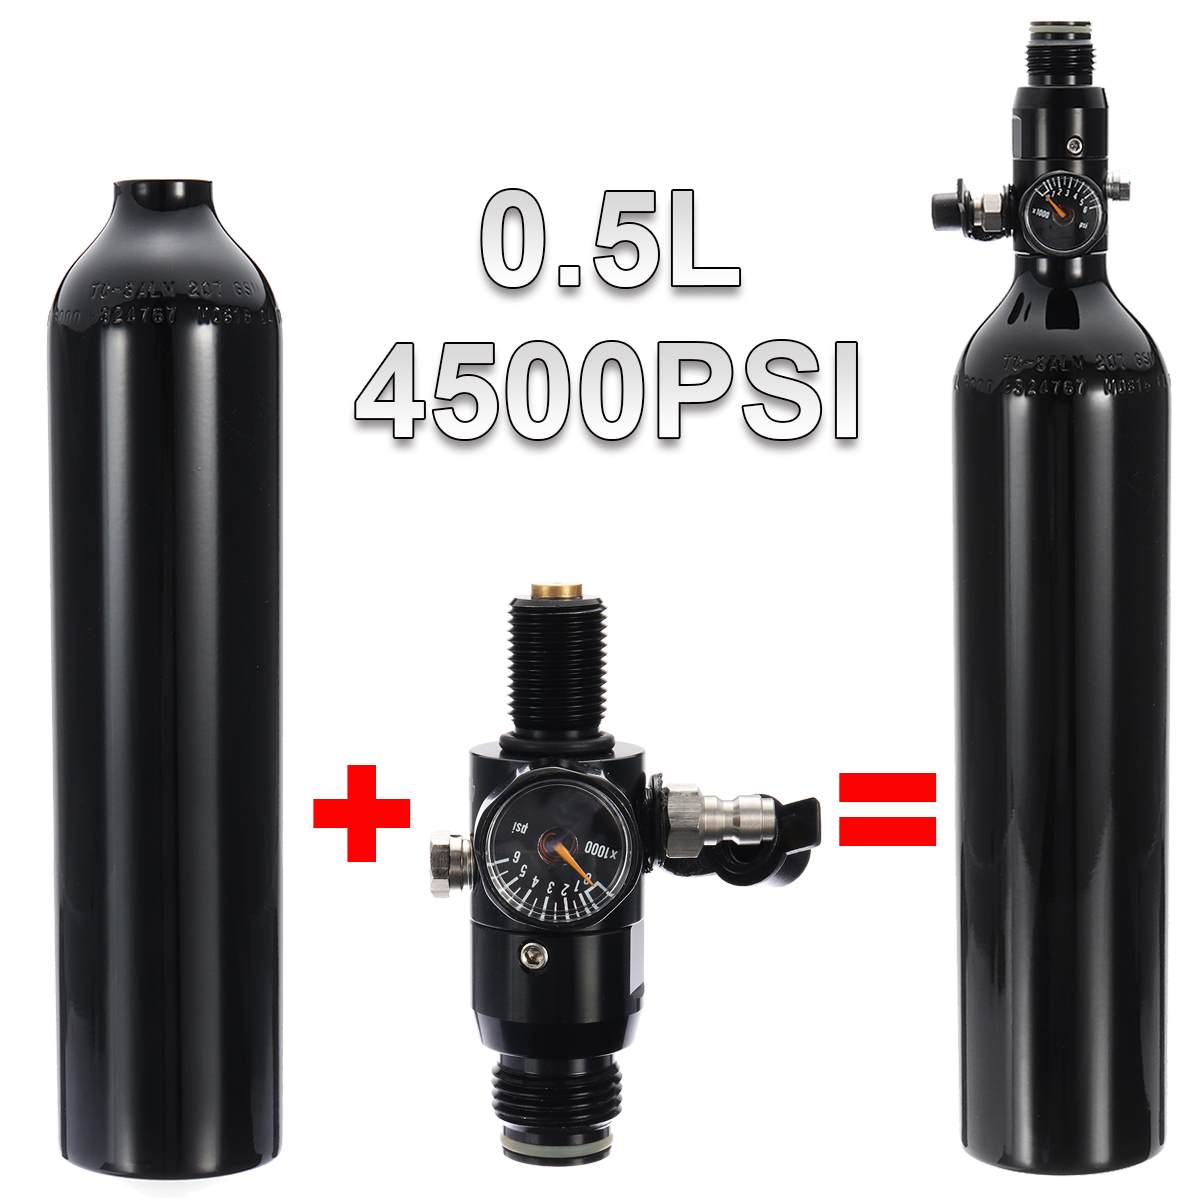 4500psi PCP Cylinder Tank 0.45L Compressed Air Bottle w/ Regulator For Airsoft 